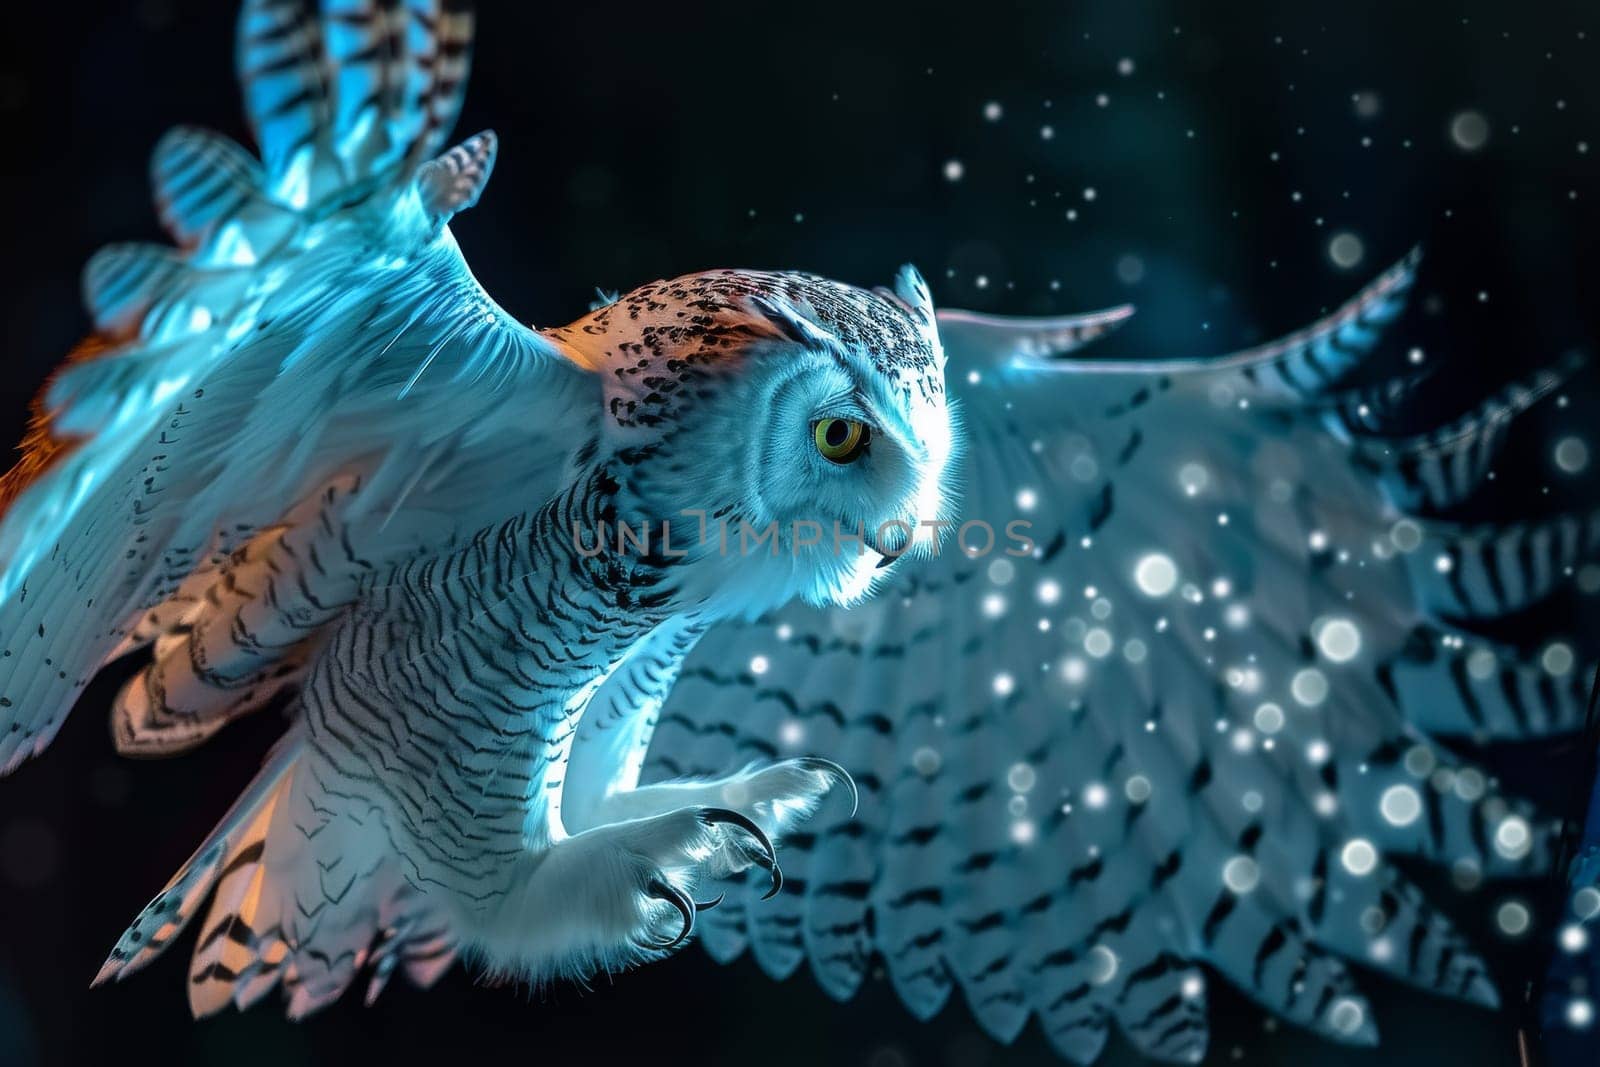 A white owl with black spots flying through the air. The owl is surrounded by a blue and white background, giving the impression of a dreamy, ethereal atmosphere